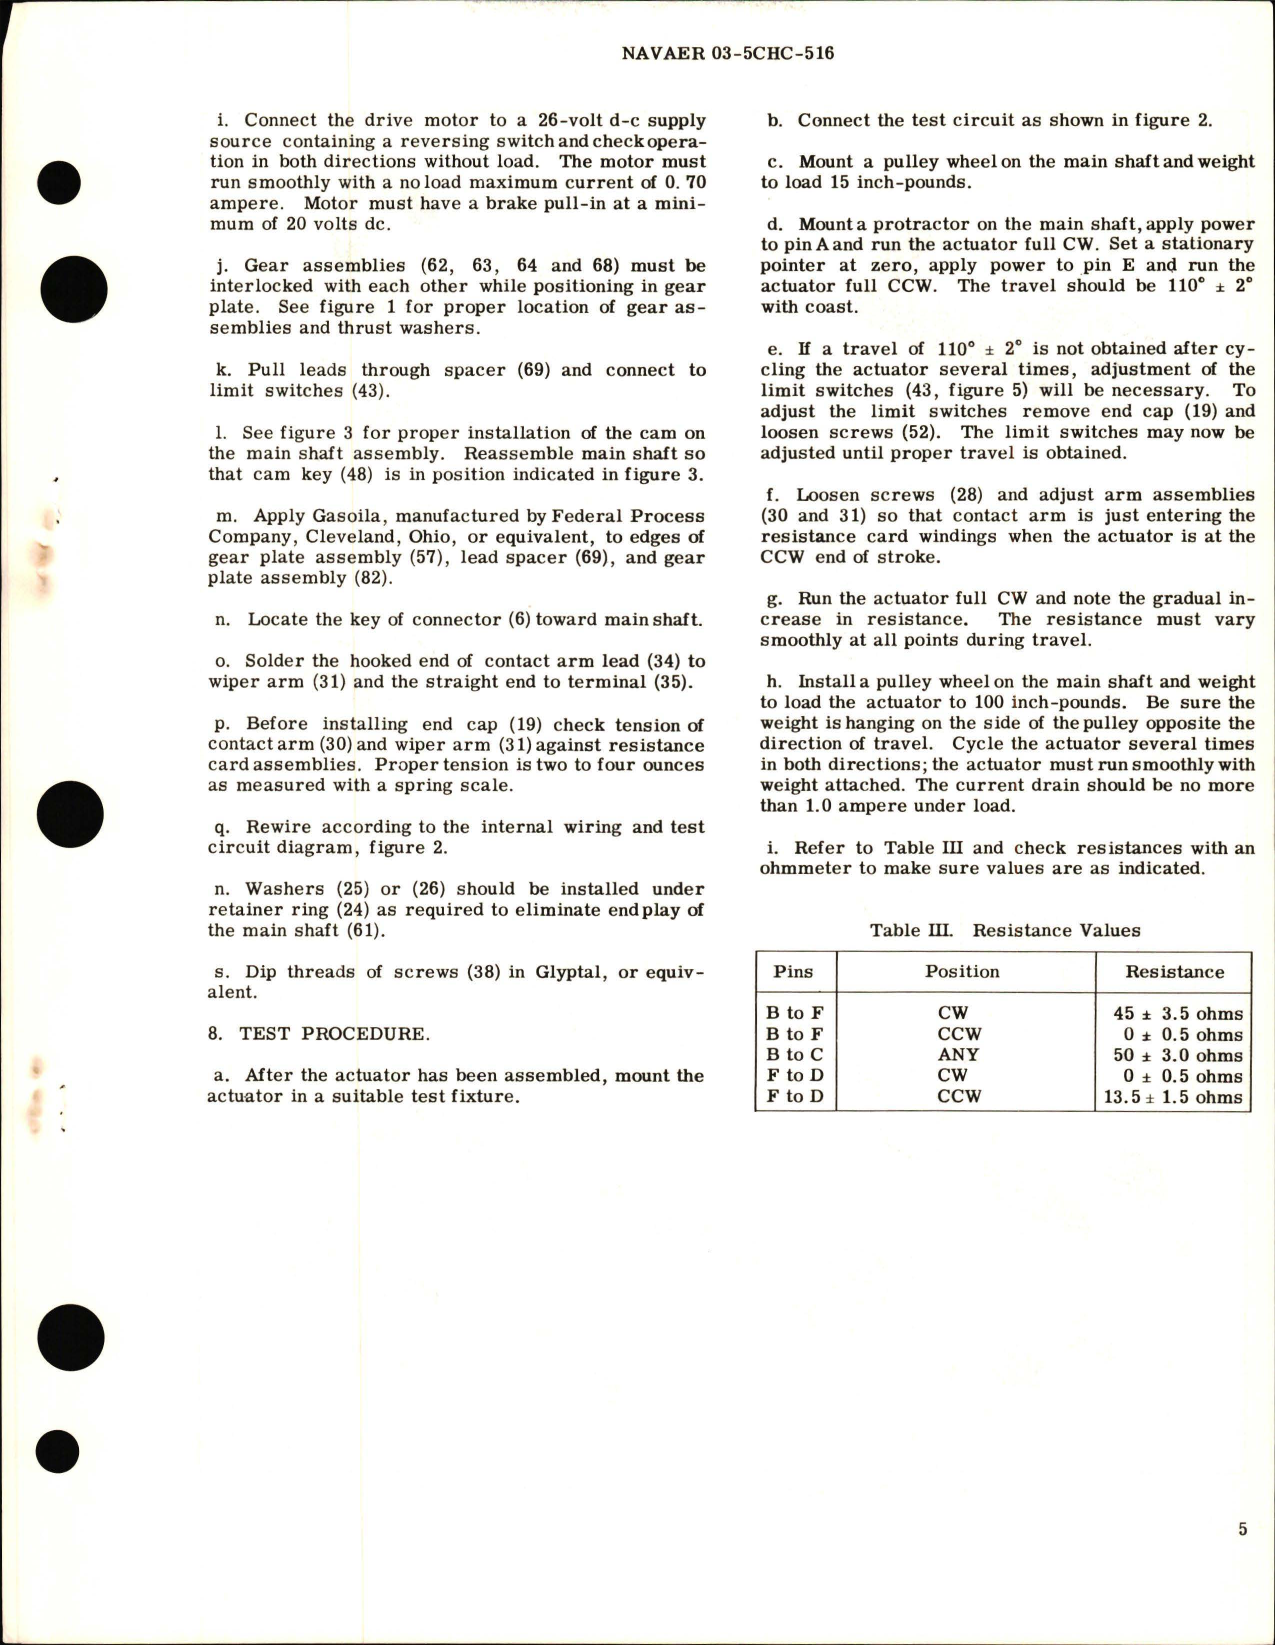 Sample page 5 from AirCorps Library document: Overhaul Instructions with Parts Breakdown for Actuator - FYLC 3196-1